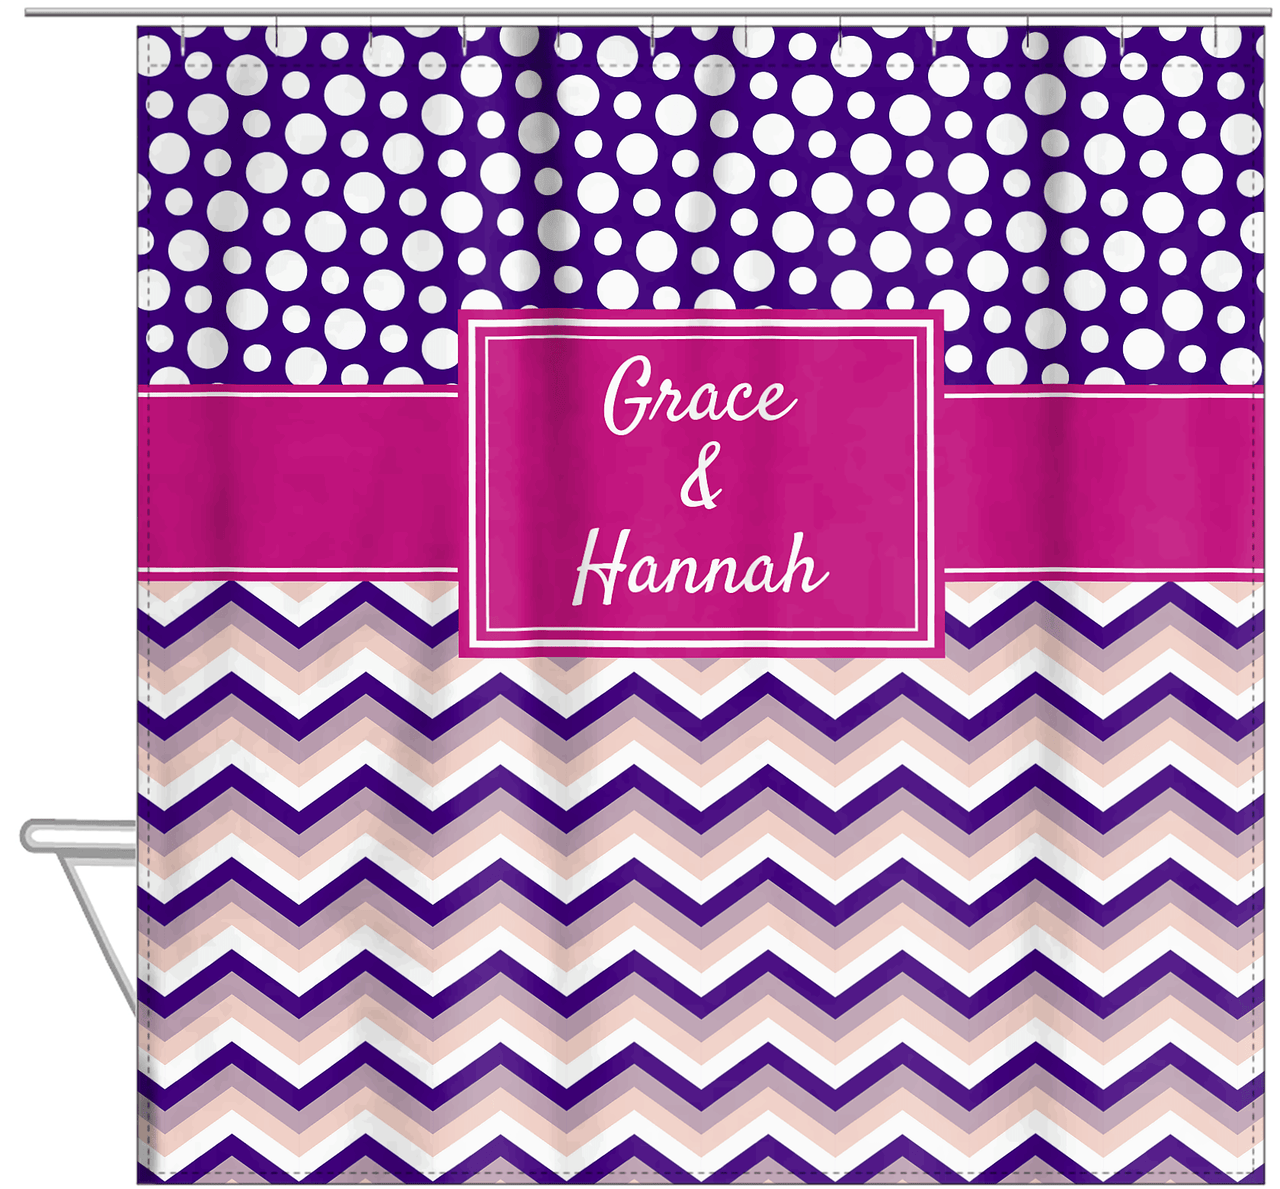 Personalized Polka Dots and Chevron IV Shower Curtain - Pink and Purple - Rectangle Nameplate - Hanging View